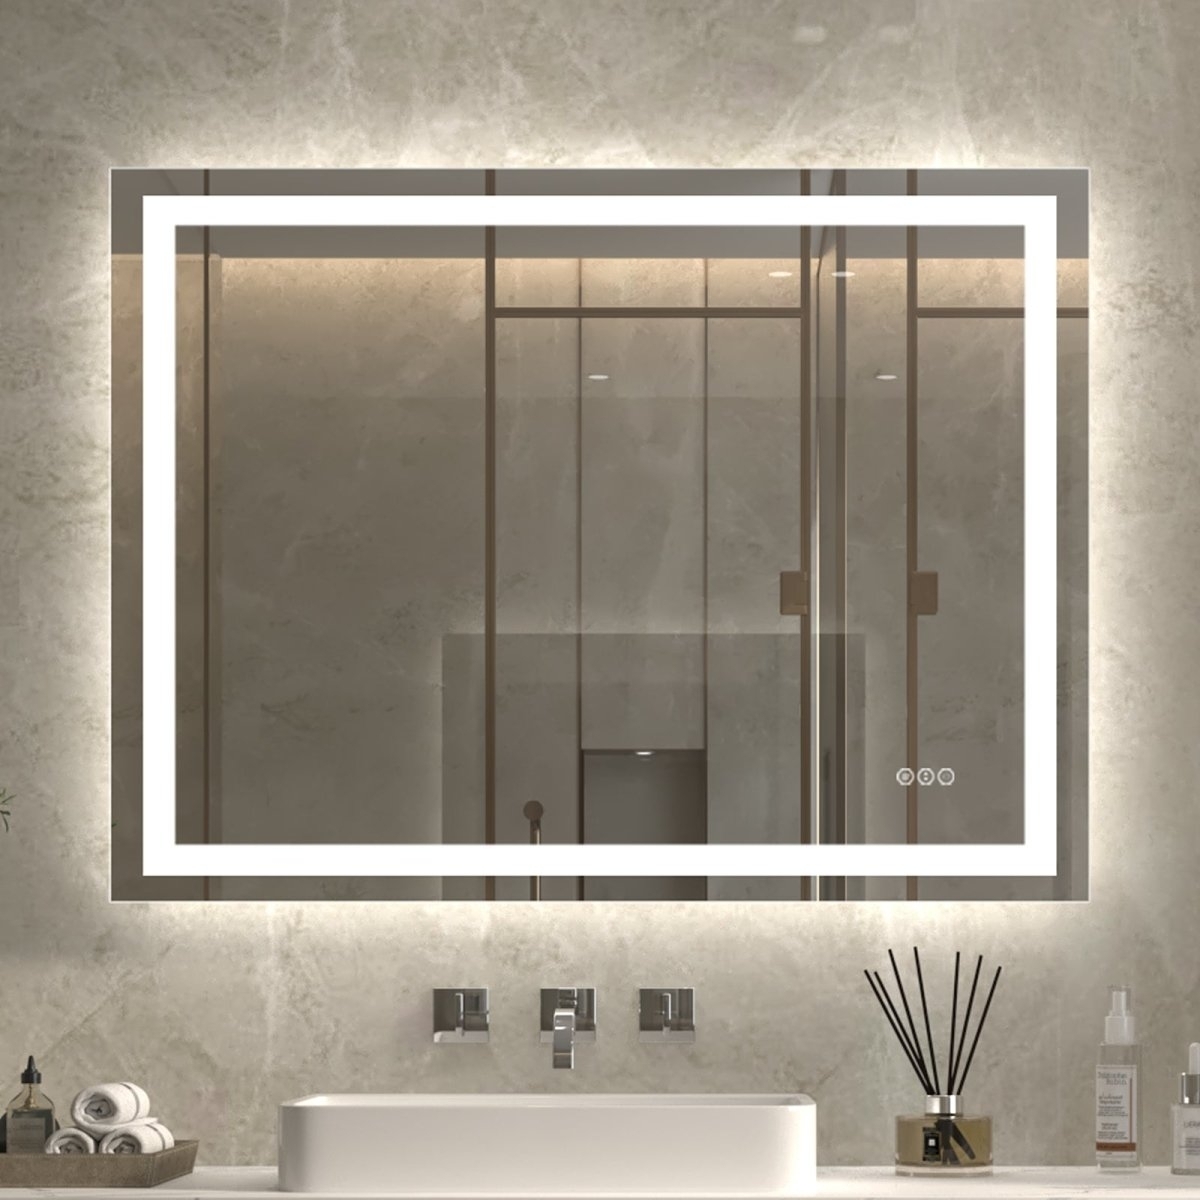 ExBrite 48" W x 36" H LED Bathroom Light Mirror,Anti Fog,Dimmable,Dual Lighting Mode,Tempered Glass